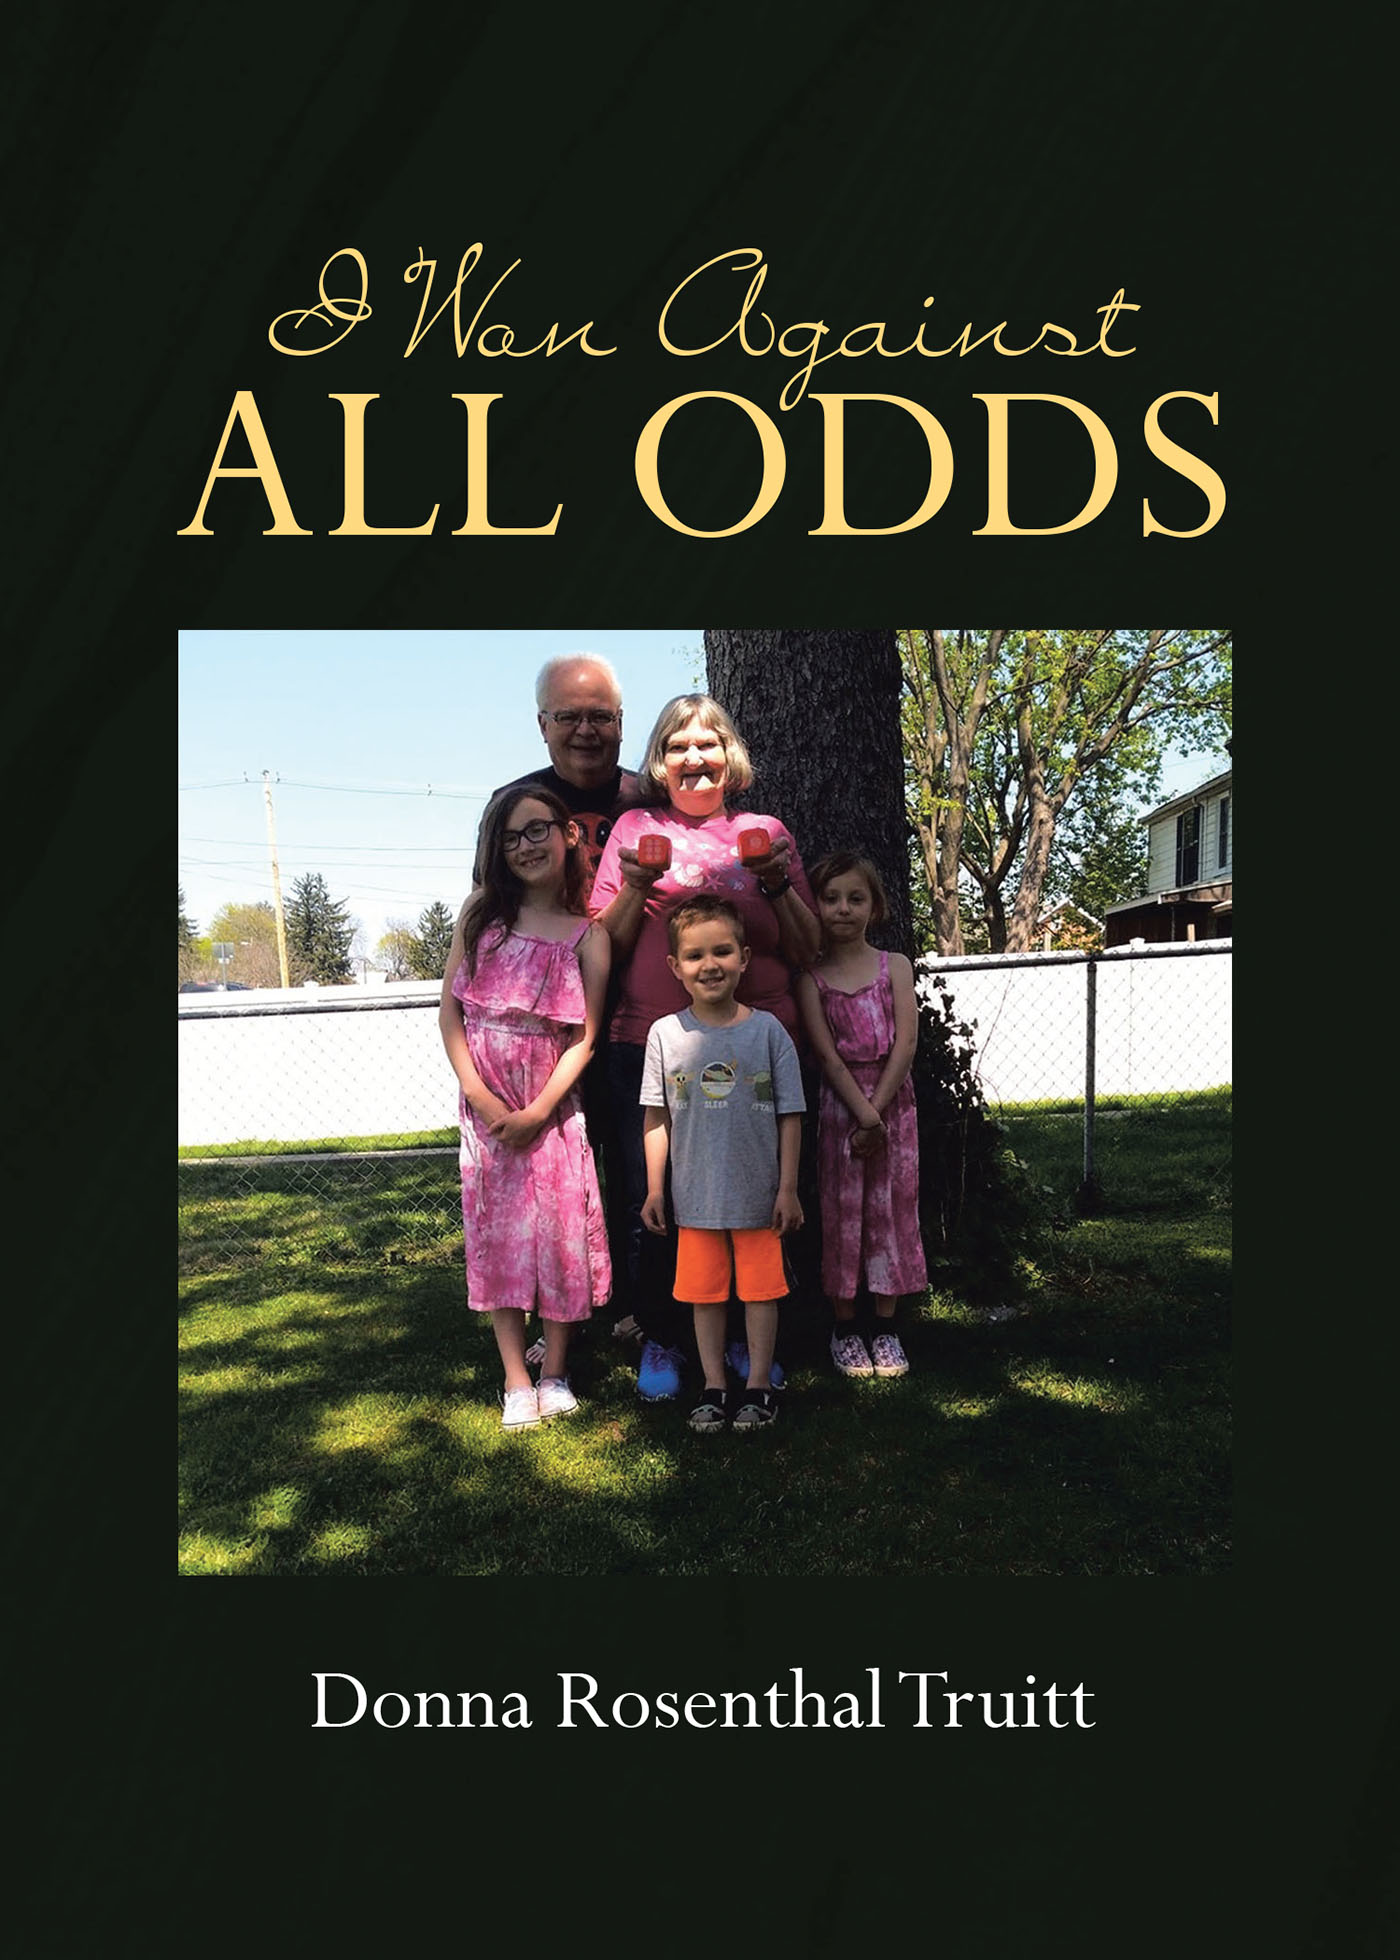 I Won Against All Odds Cover Image